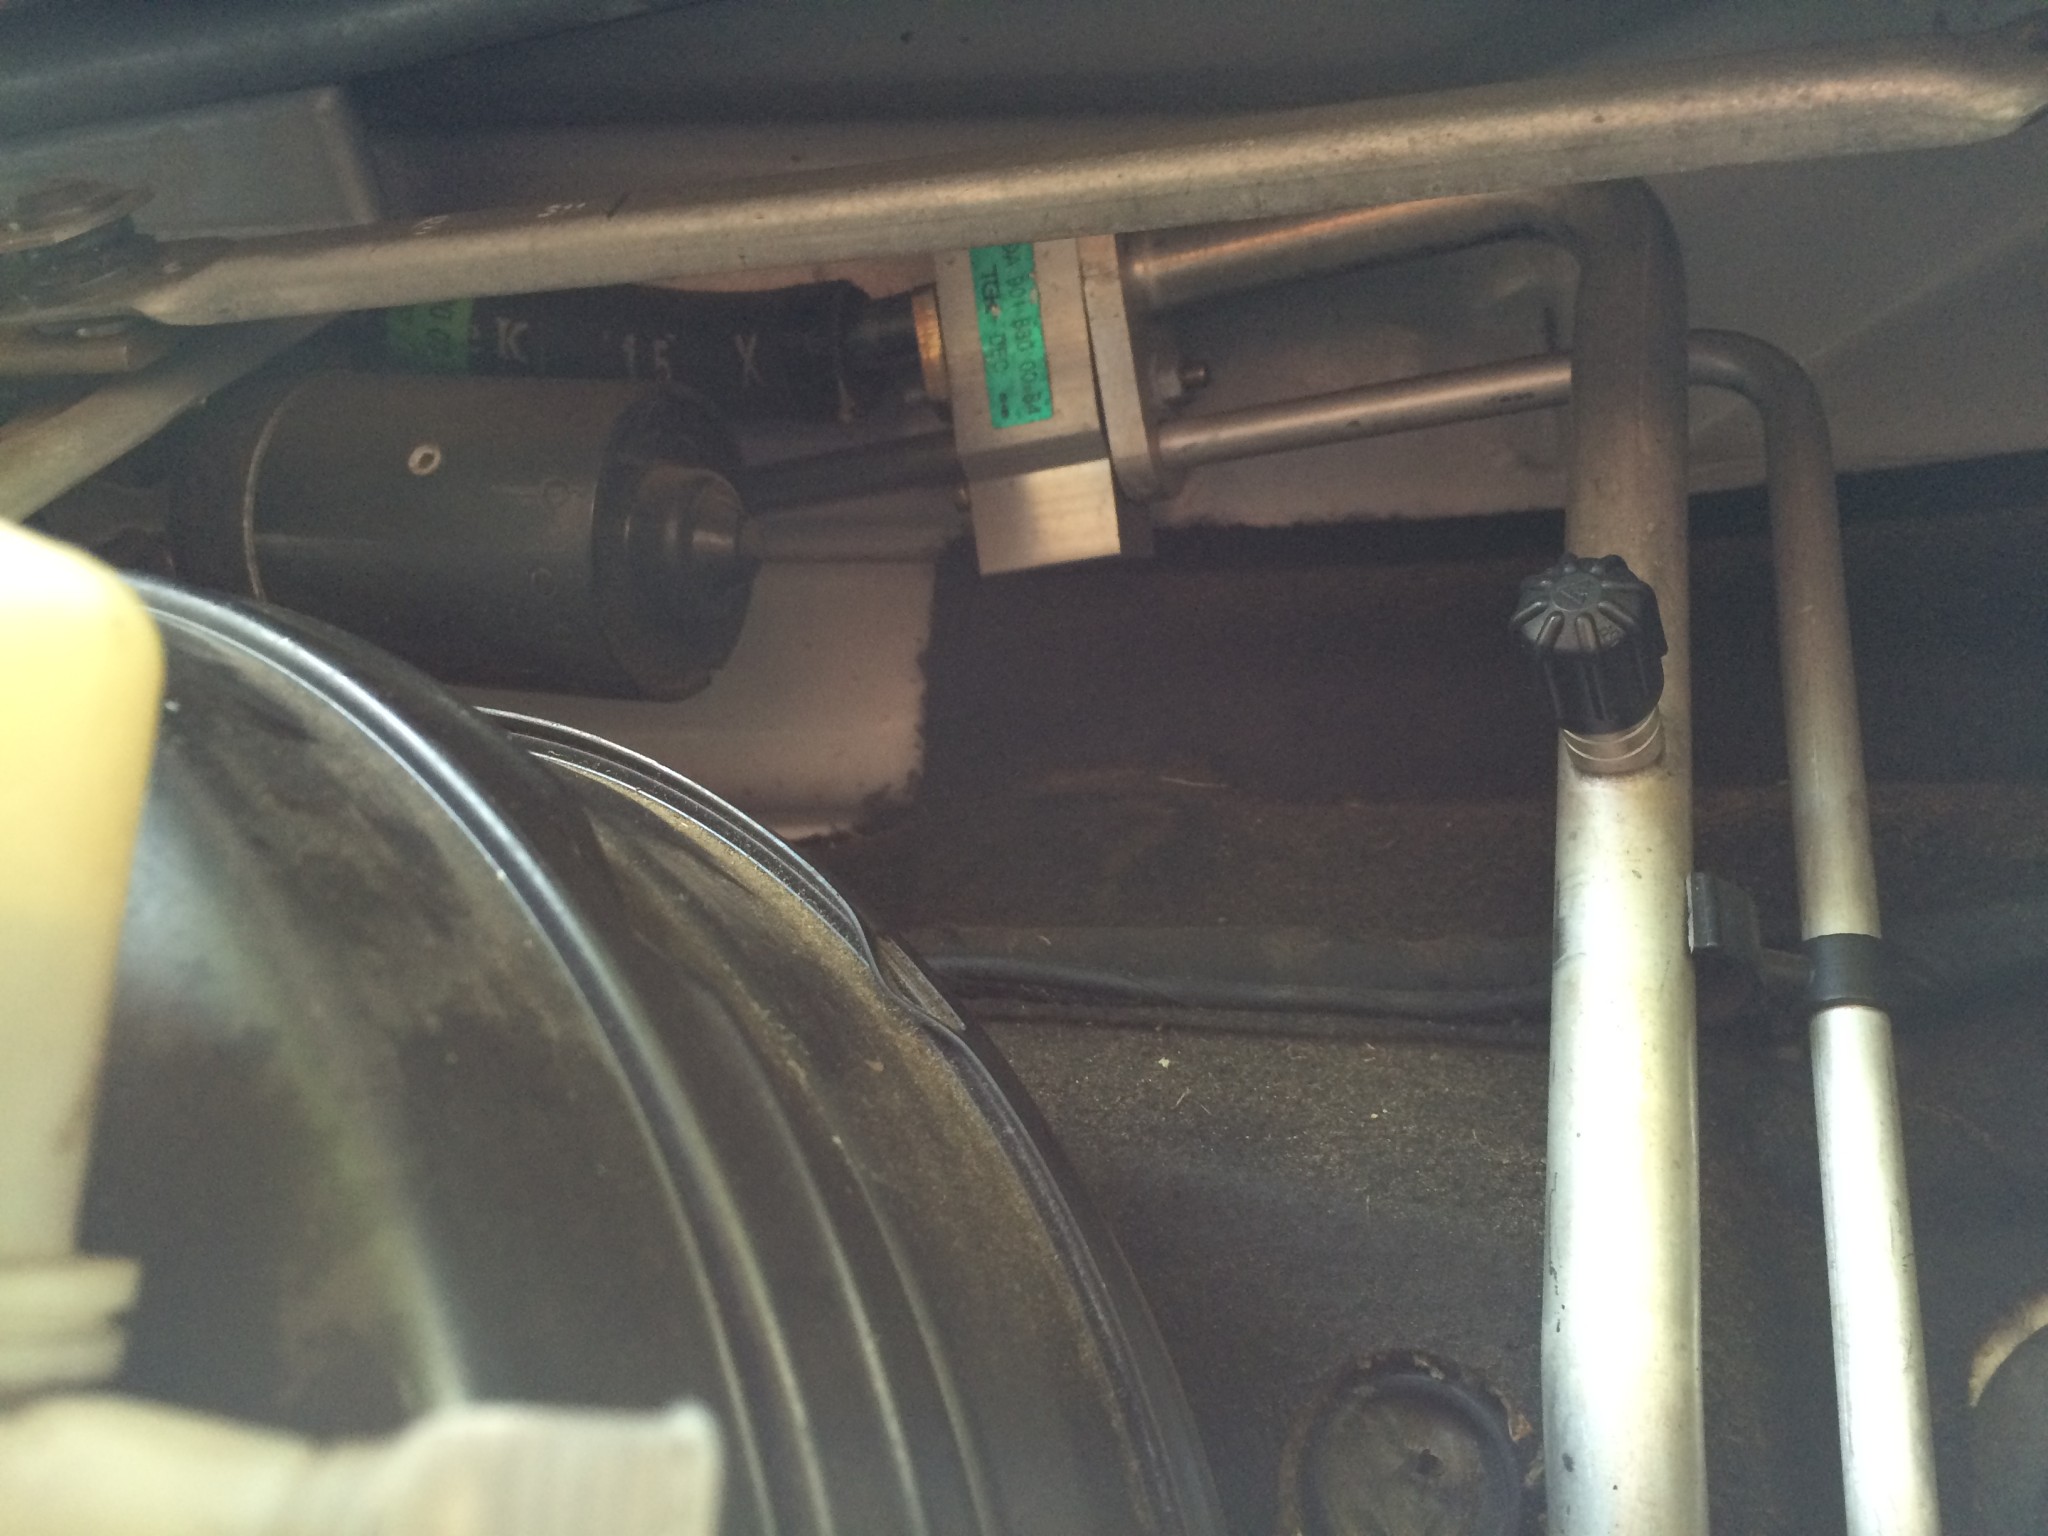 Location of the A/C Expansion Valve in the engine compartment.